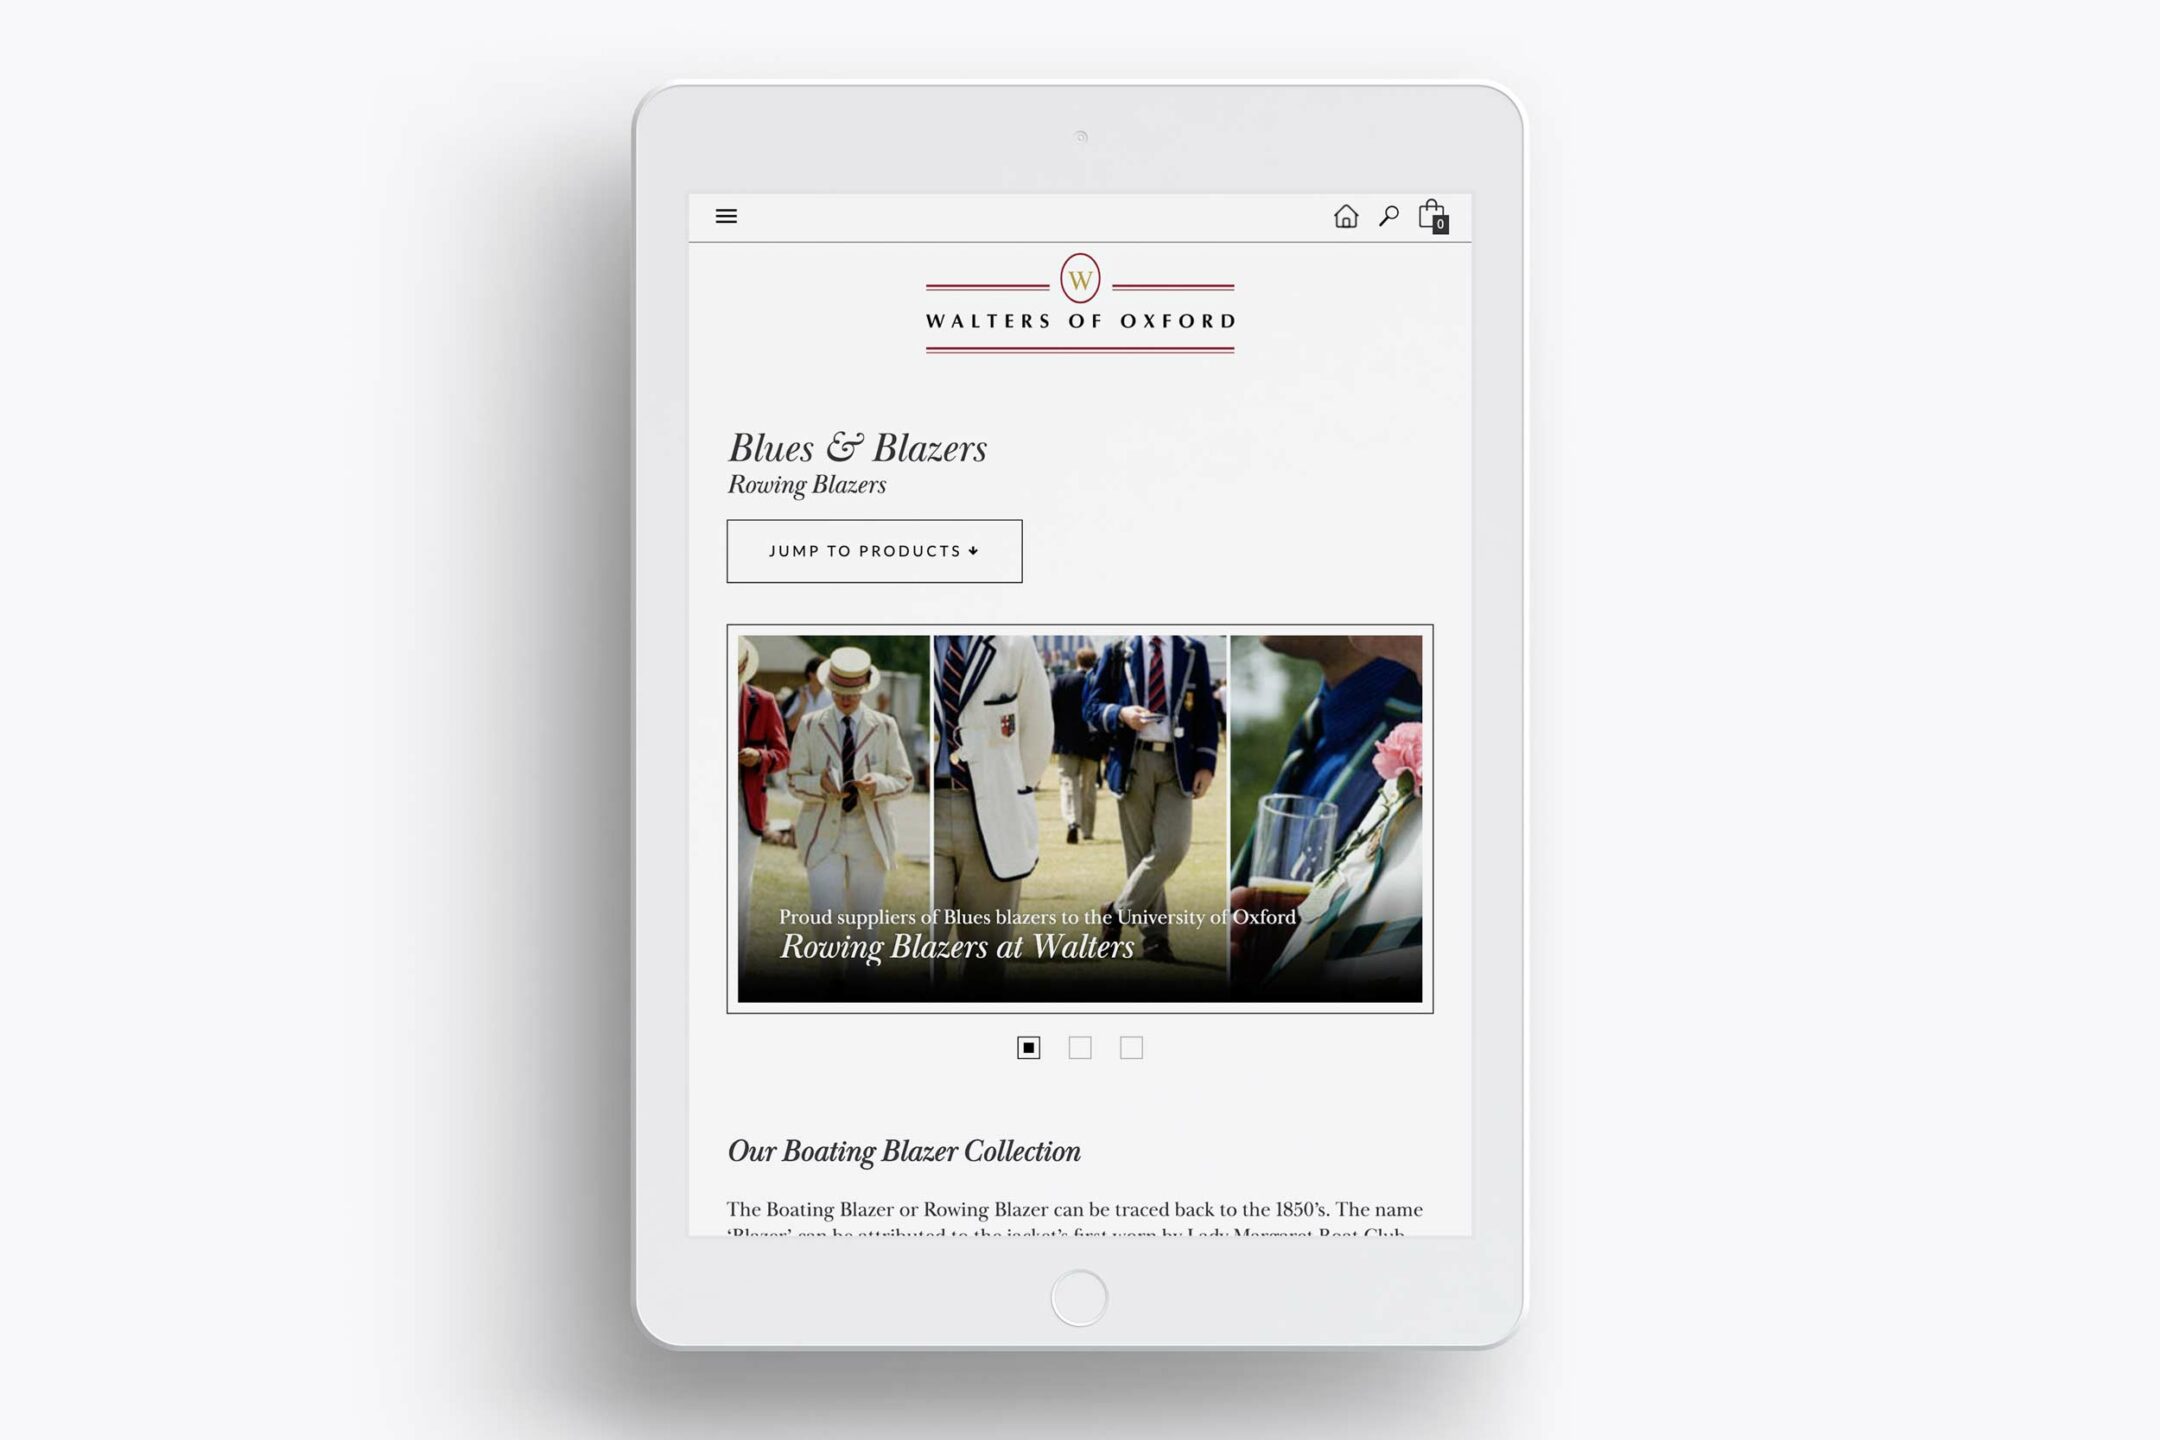 The Walters of Oxford website displayed on a tablet